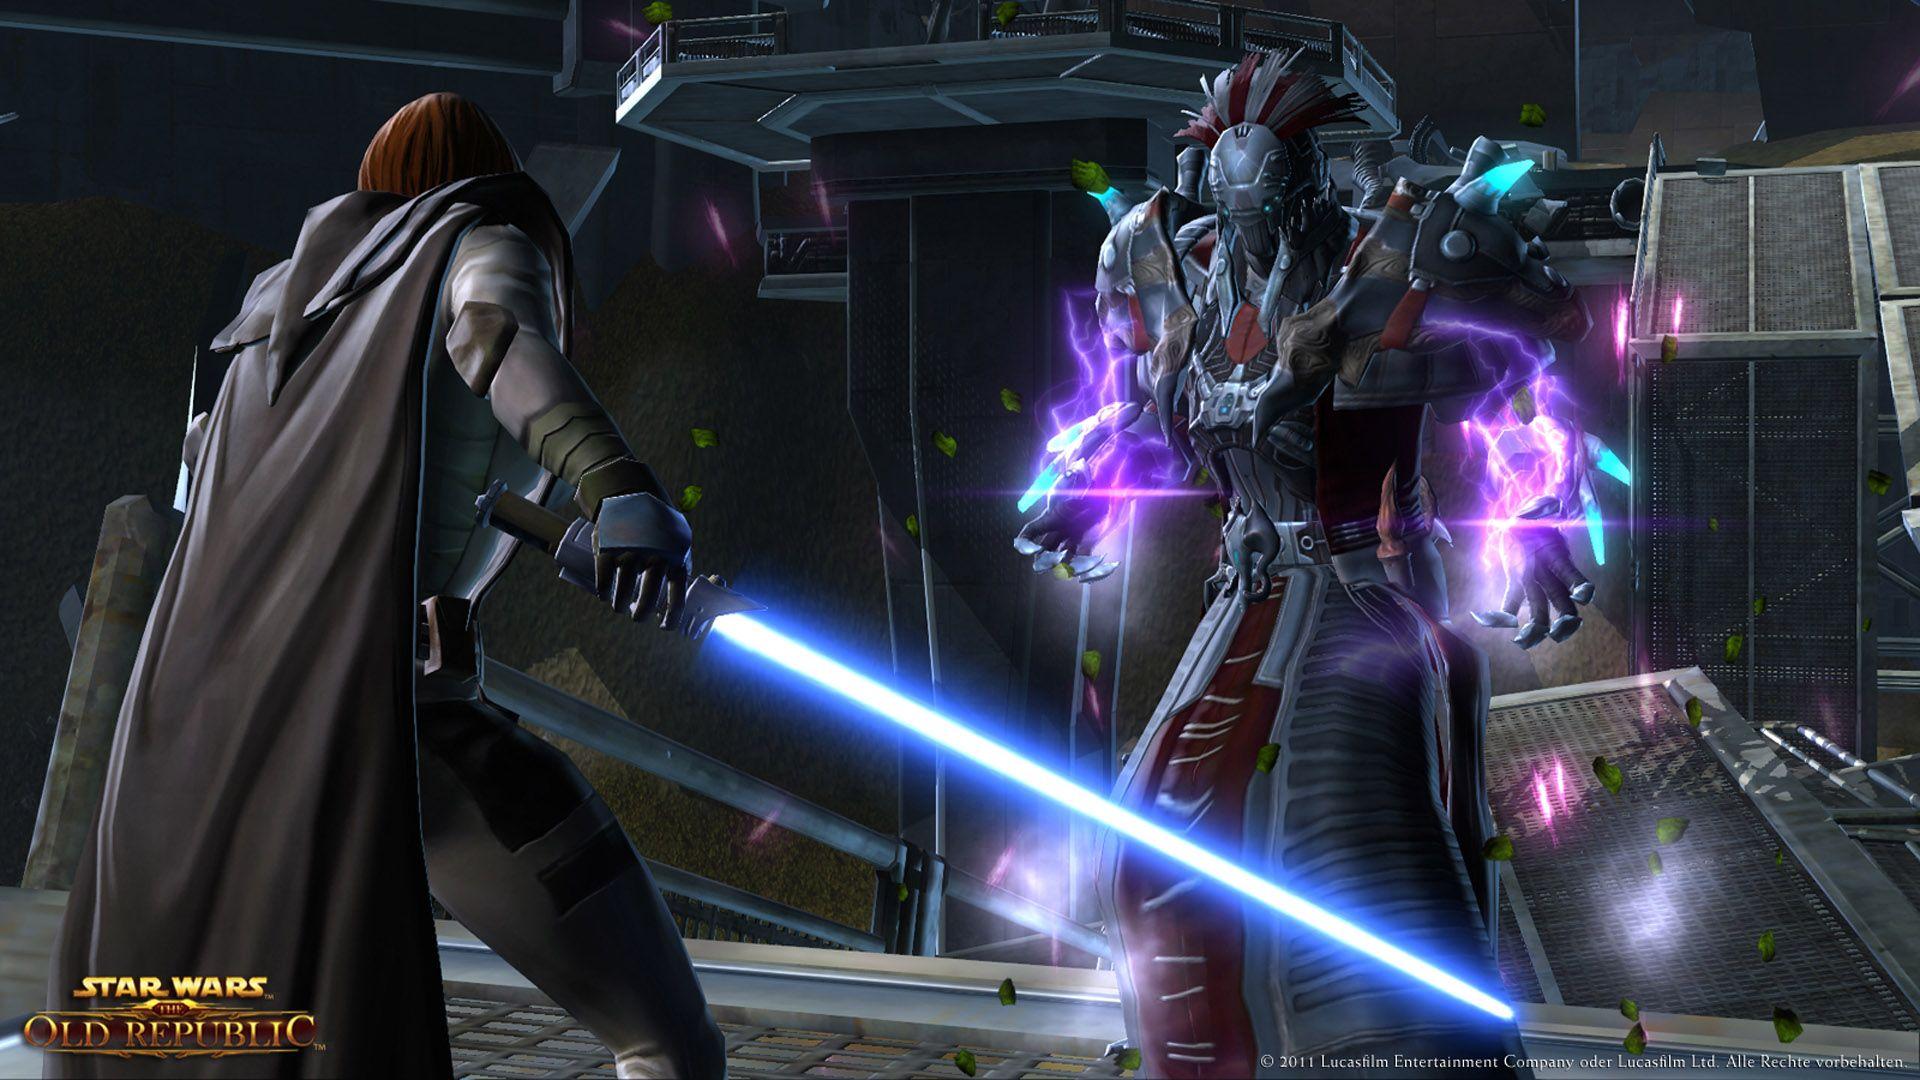 Star Wars The Old Republic Scene From The Video Game HD Wallpaper